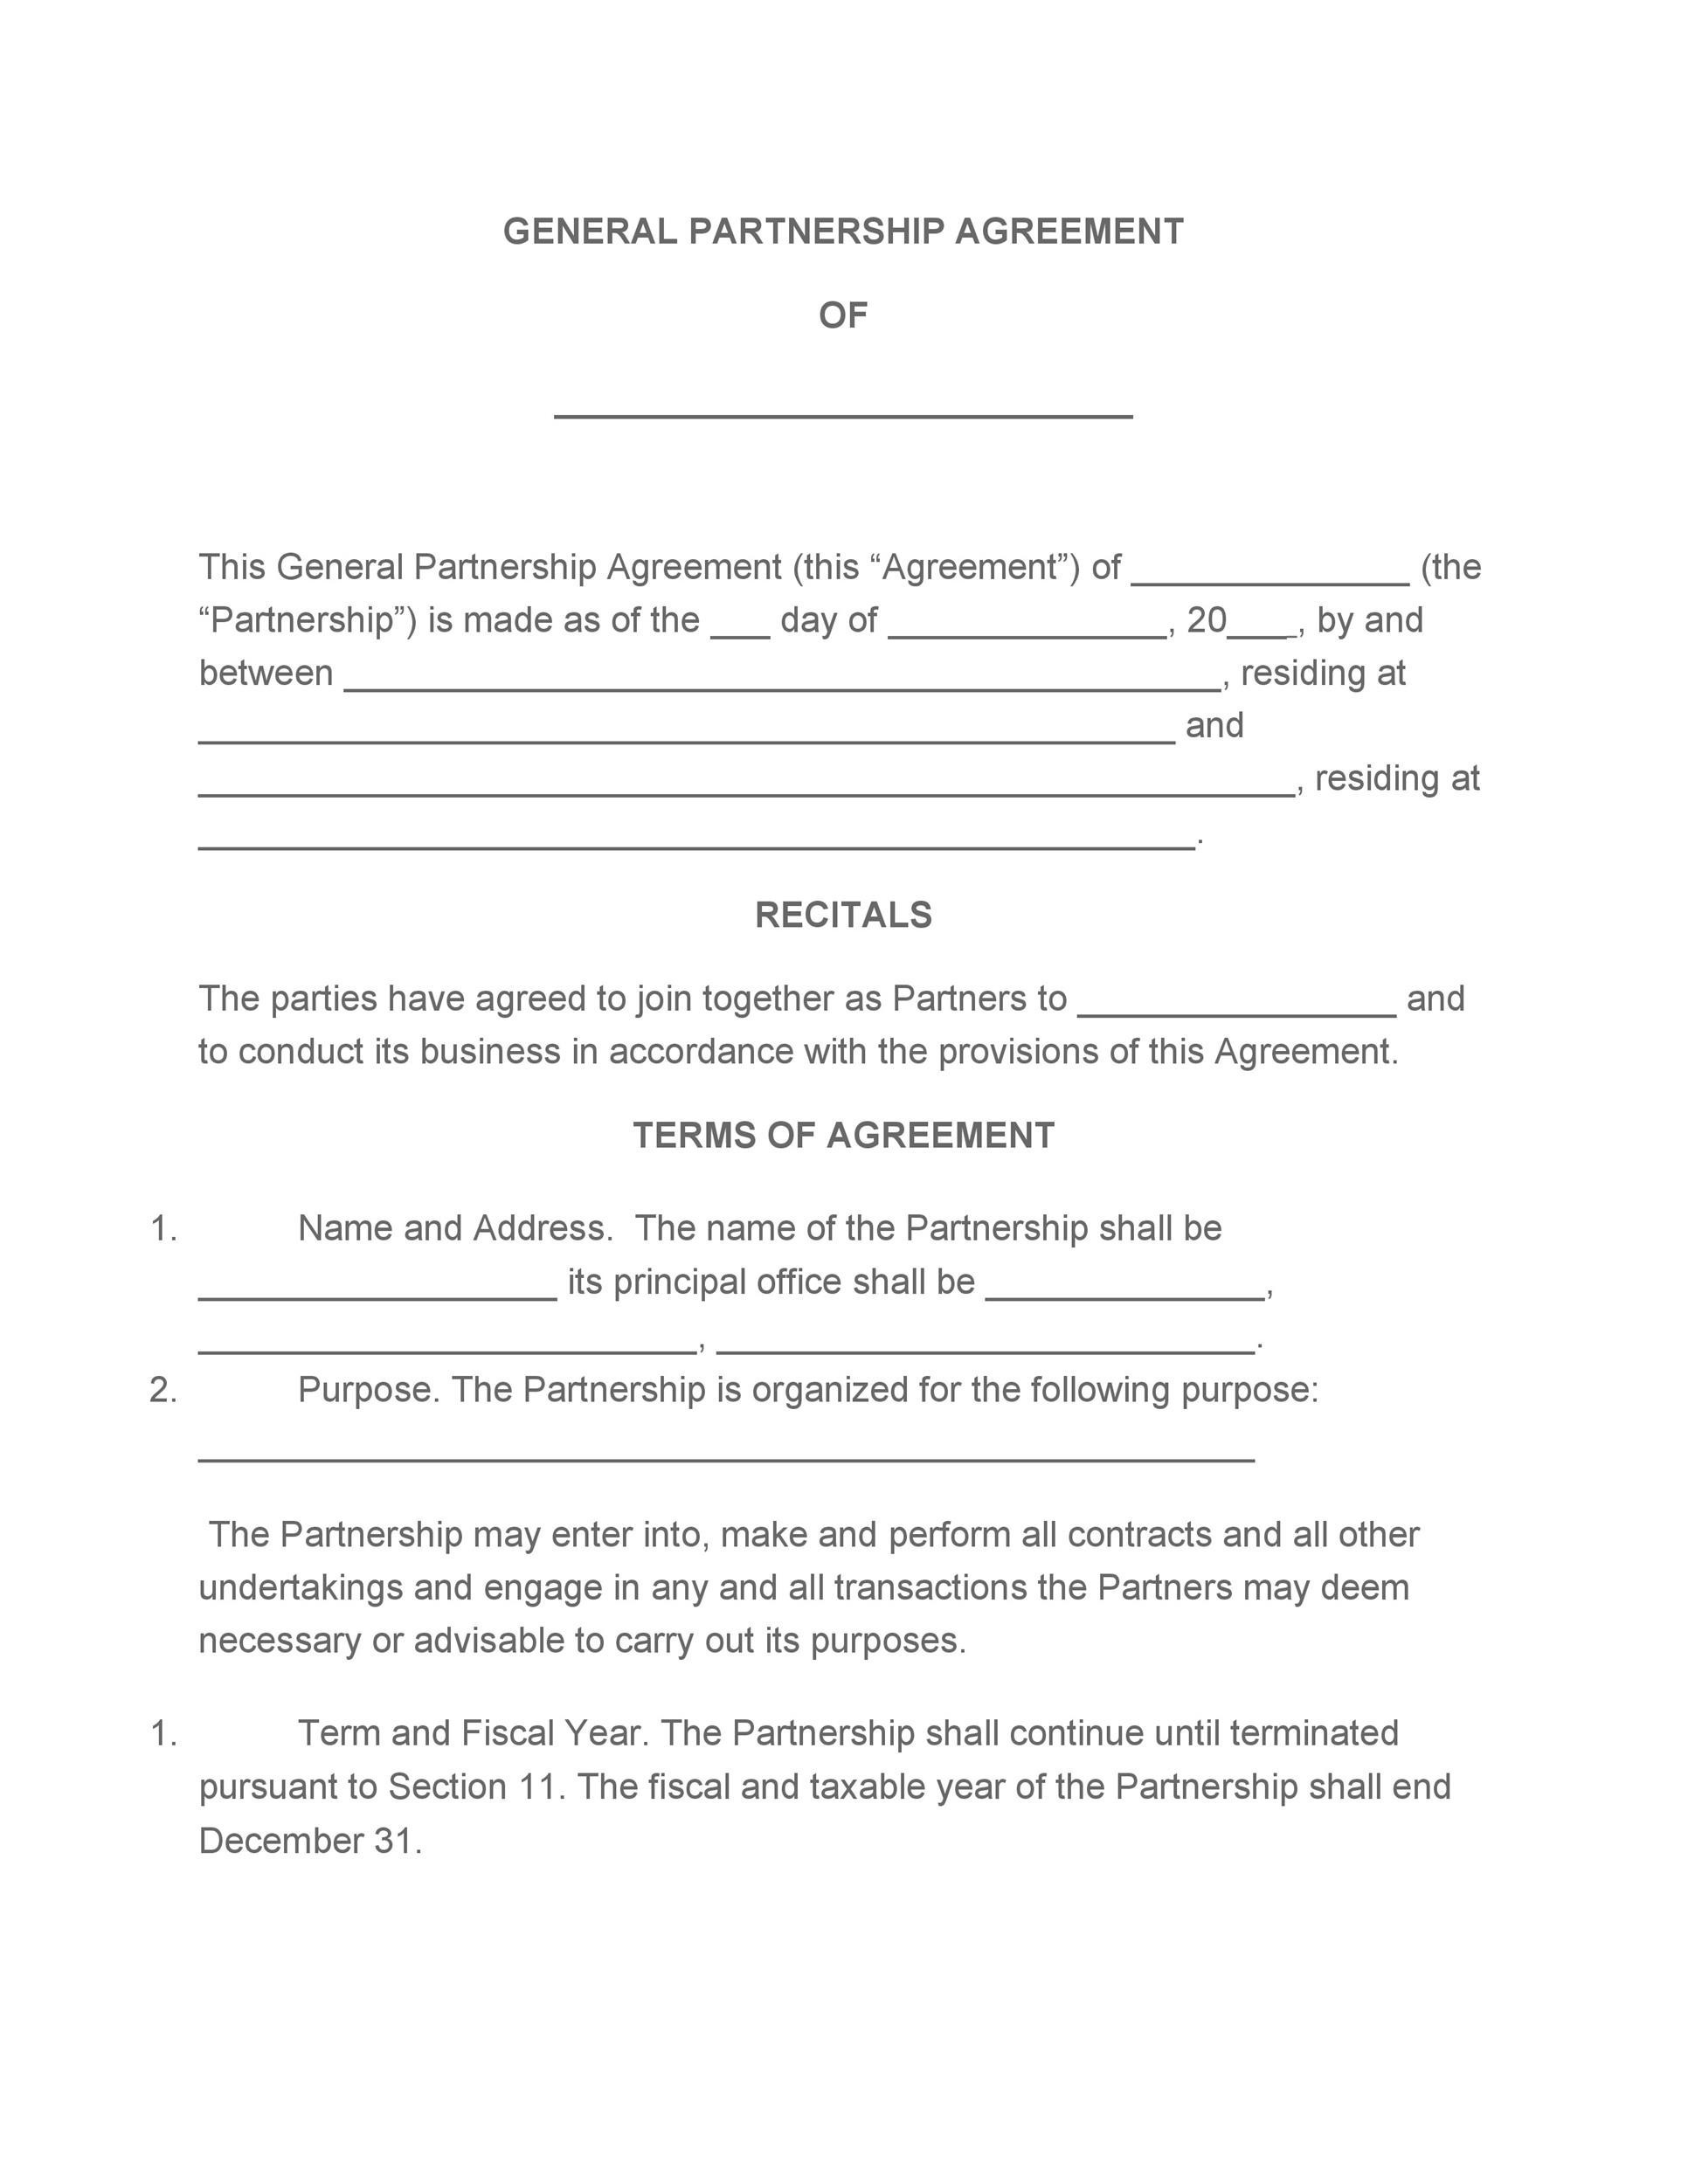 40-free-partnership-agreement-templates-business-general